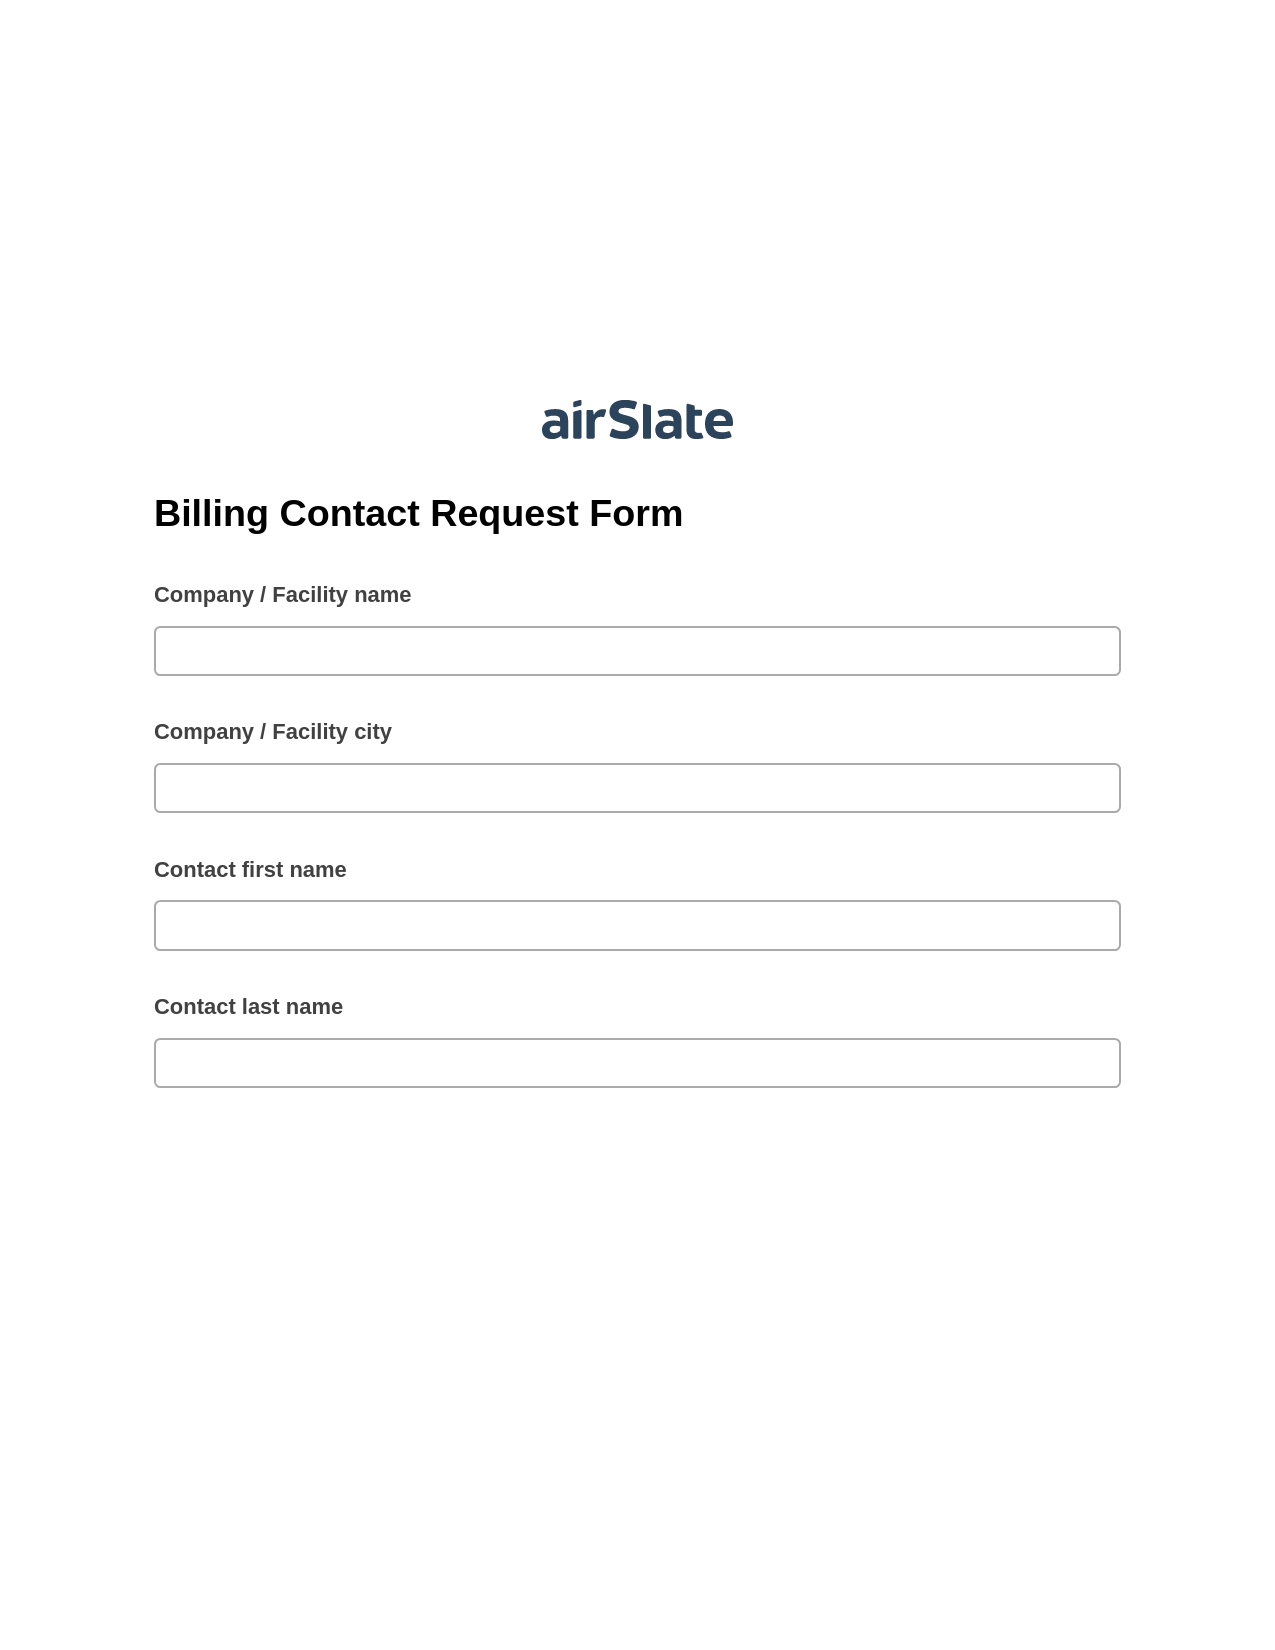 Multirole Billing Contact Request Form Pre-fill Dropdowns from CSV File Bot, Reminder Bot, Text Message Notification Postfinish Bot